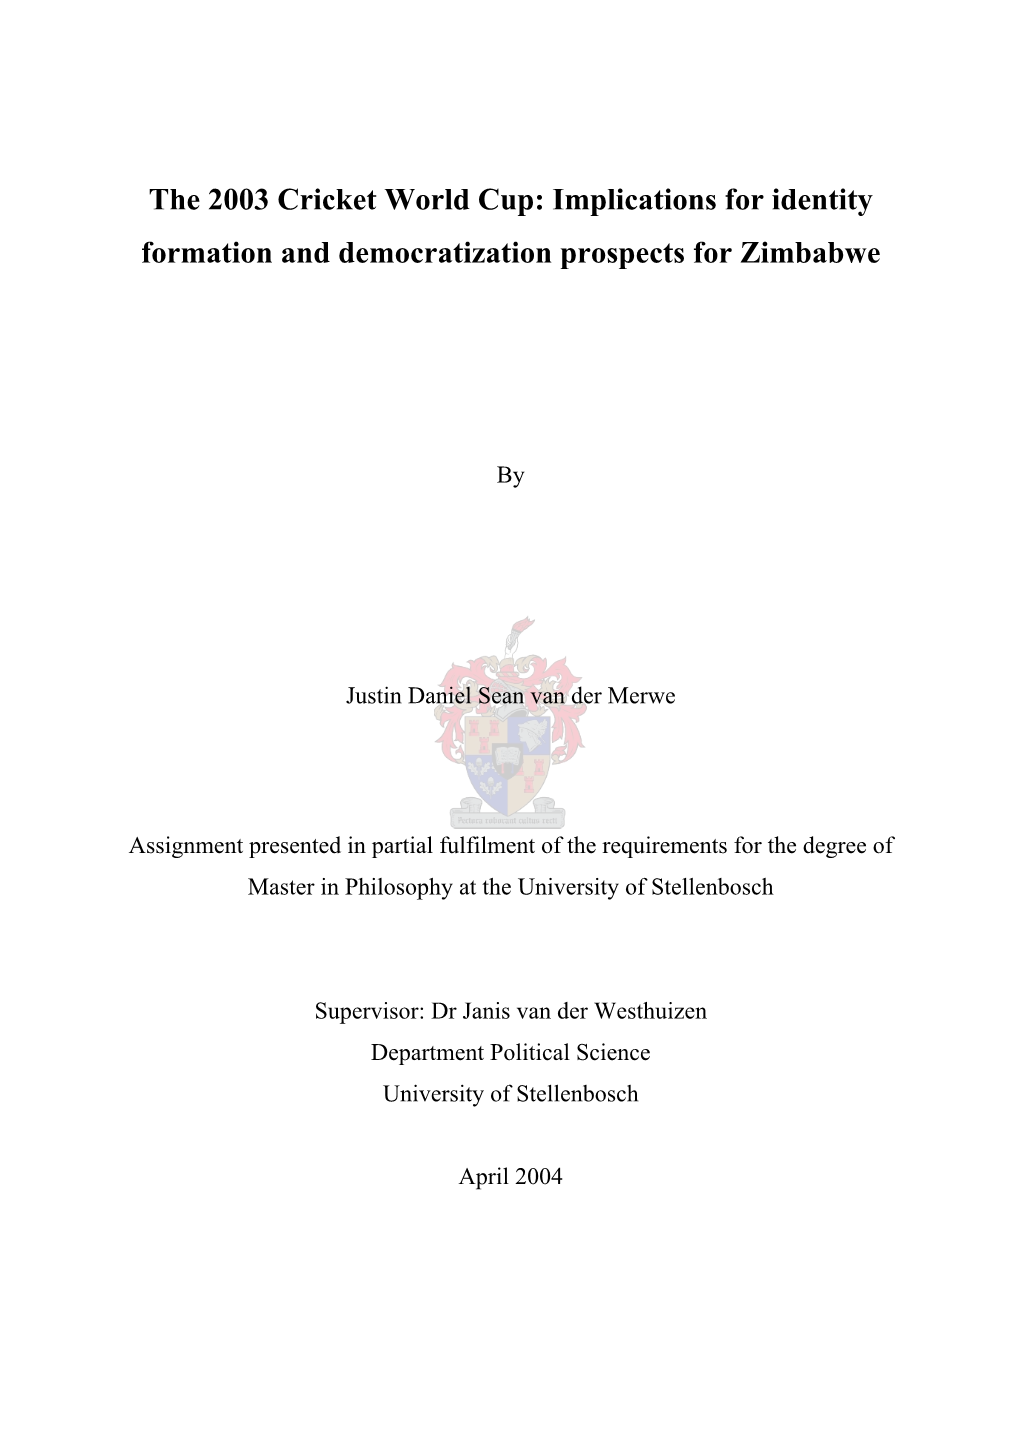 The 2003 Cricket World Cup: Implications for Identity Formation and Democratization Prospects for Zimbabwe